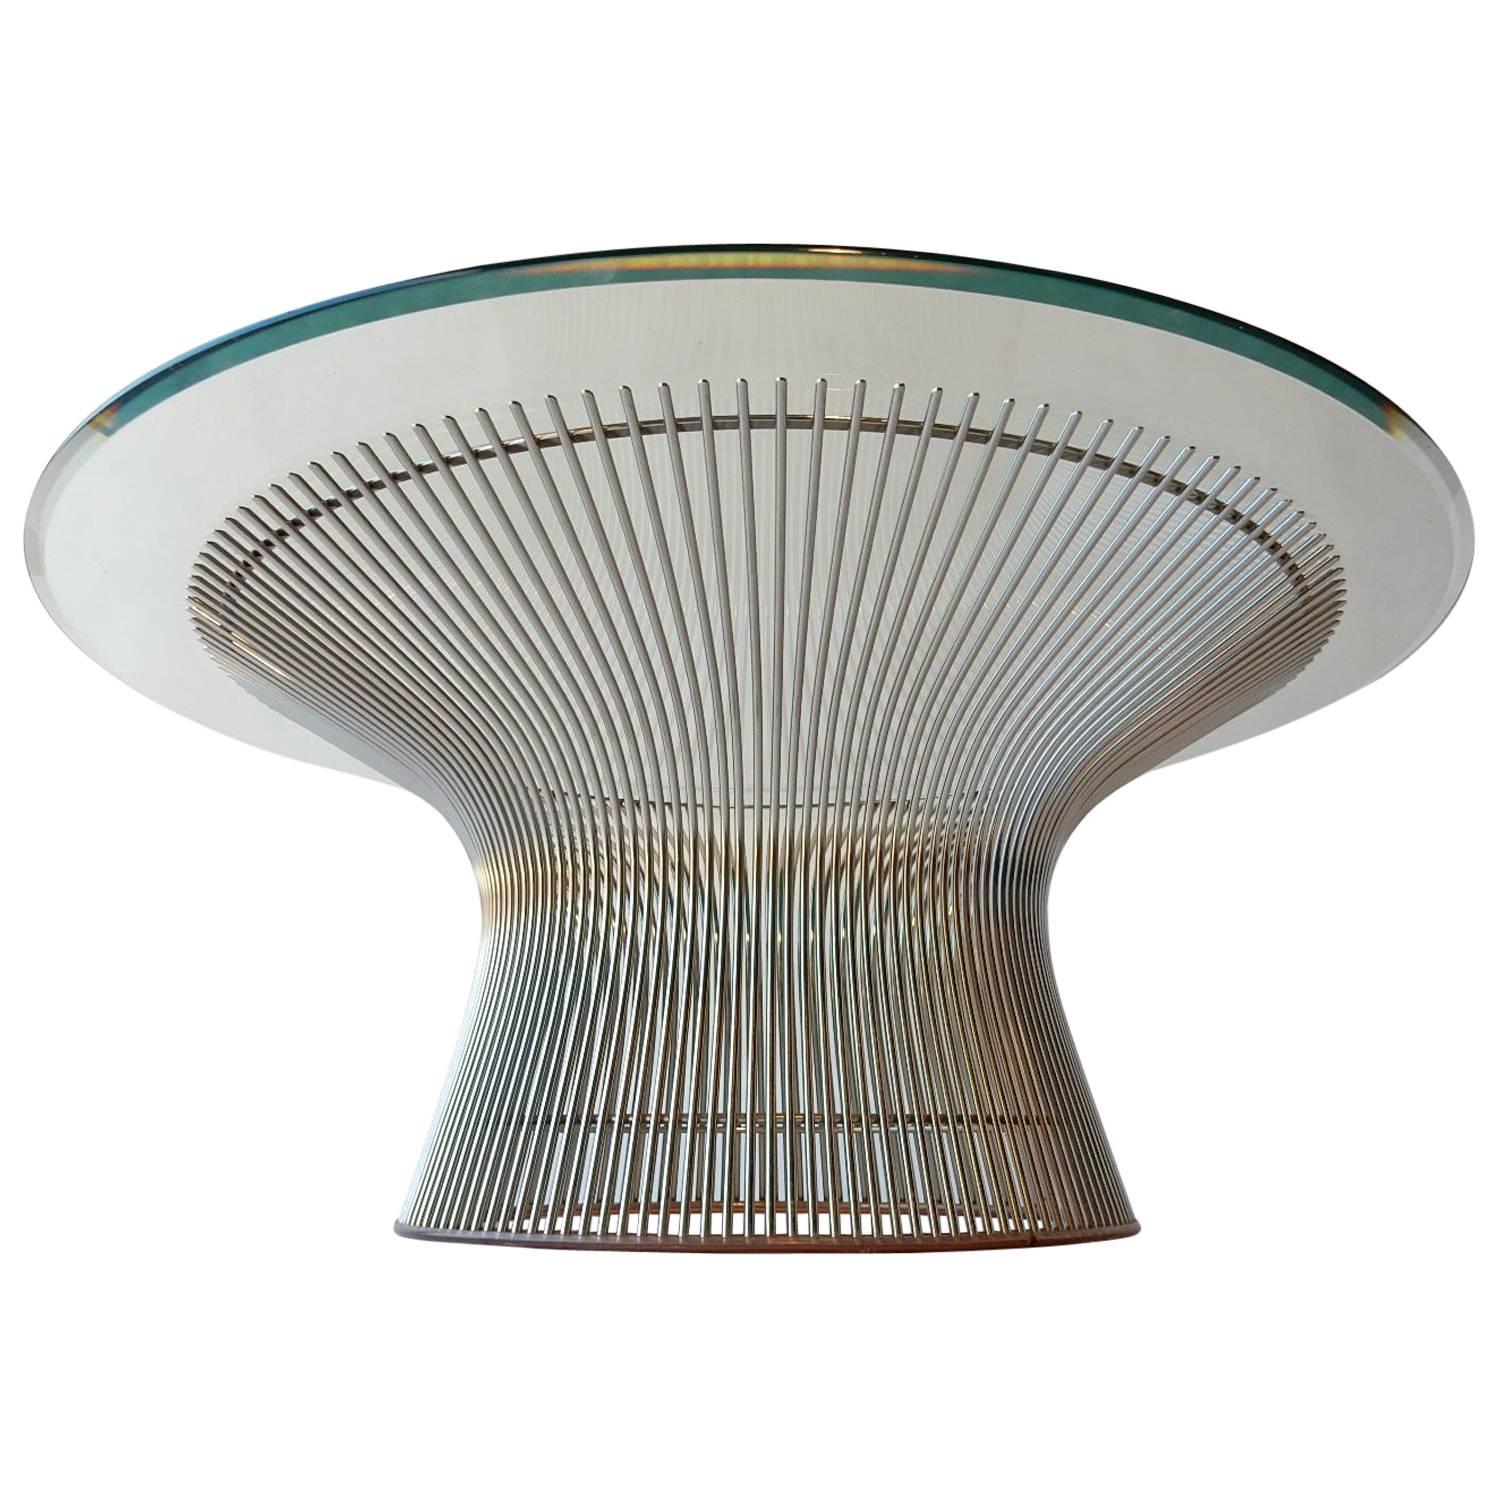 Warren Platner for Knoll Chrome Wire Coffee Table Mid-Century Modern